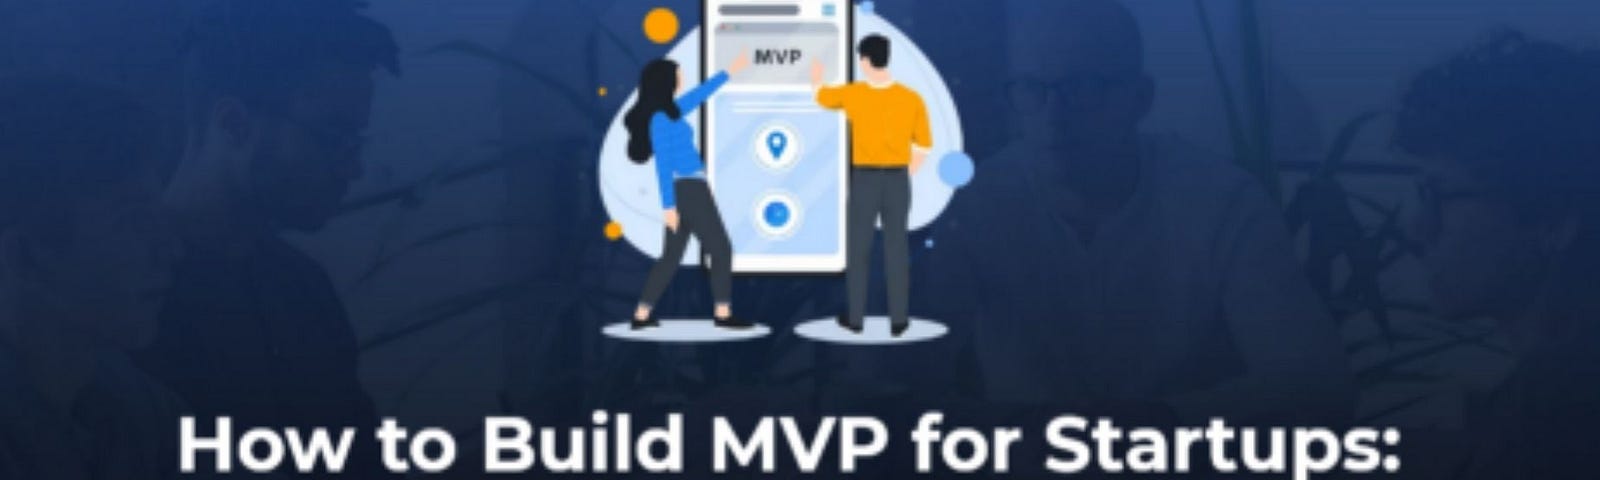 How to Build MVP for Startups